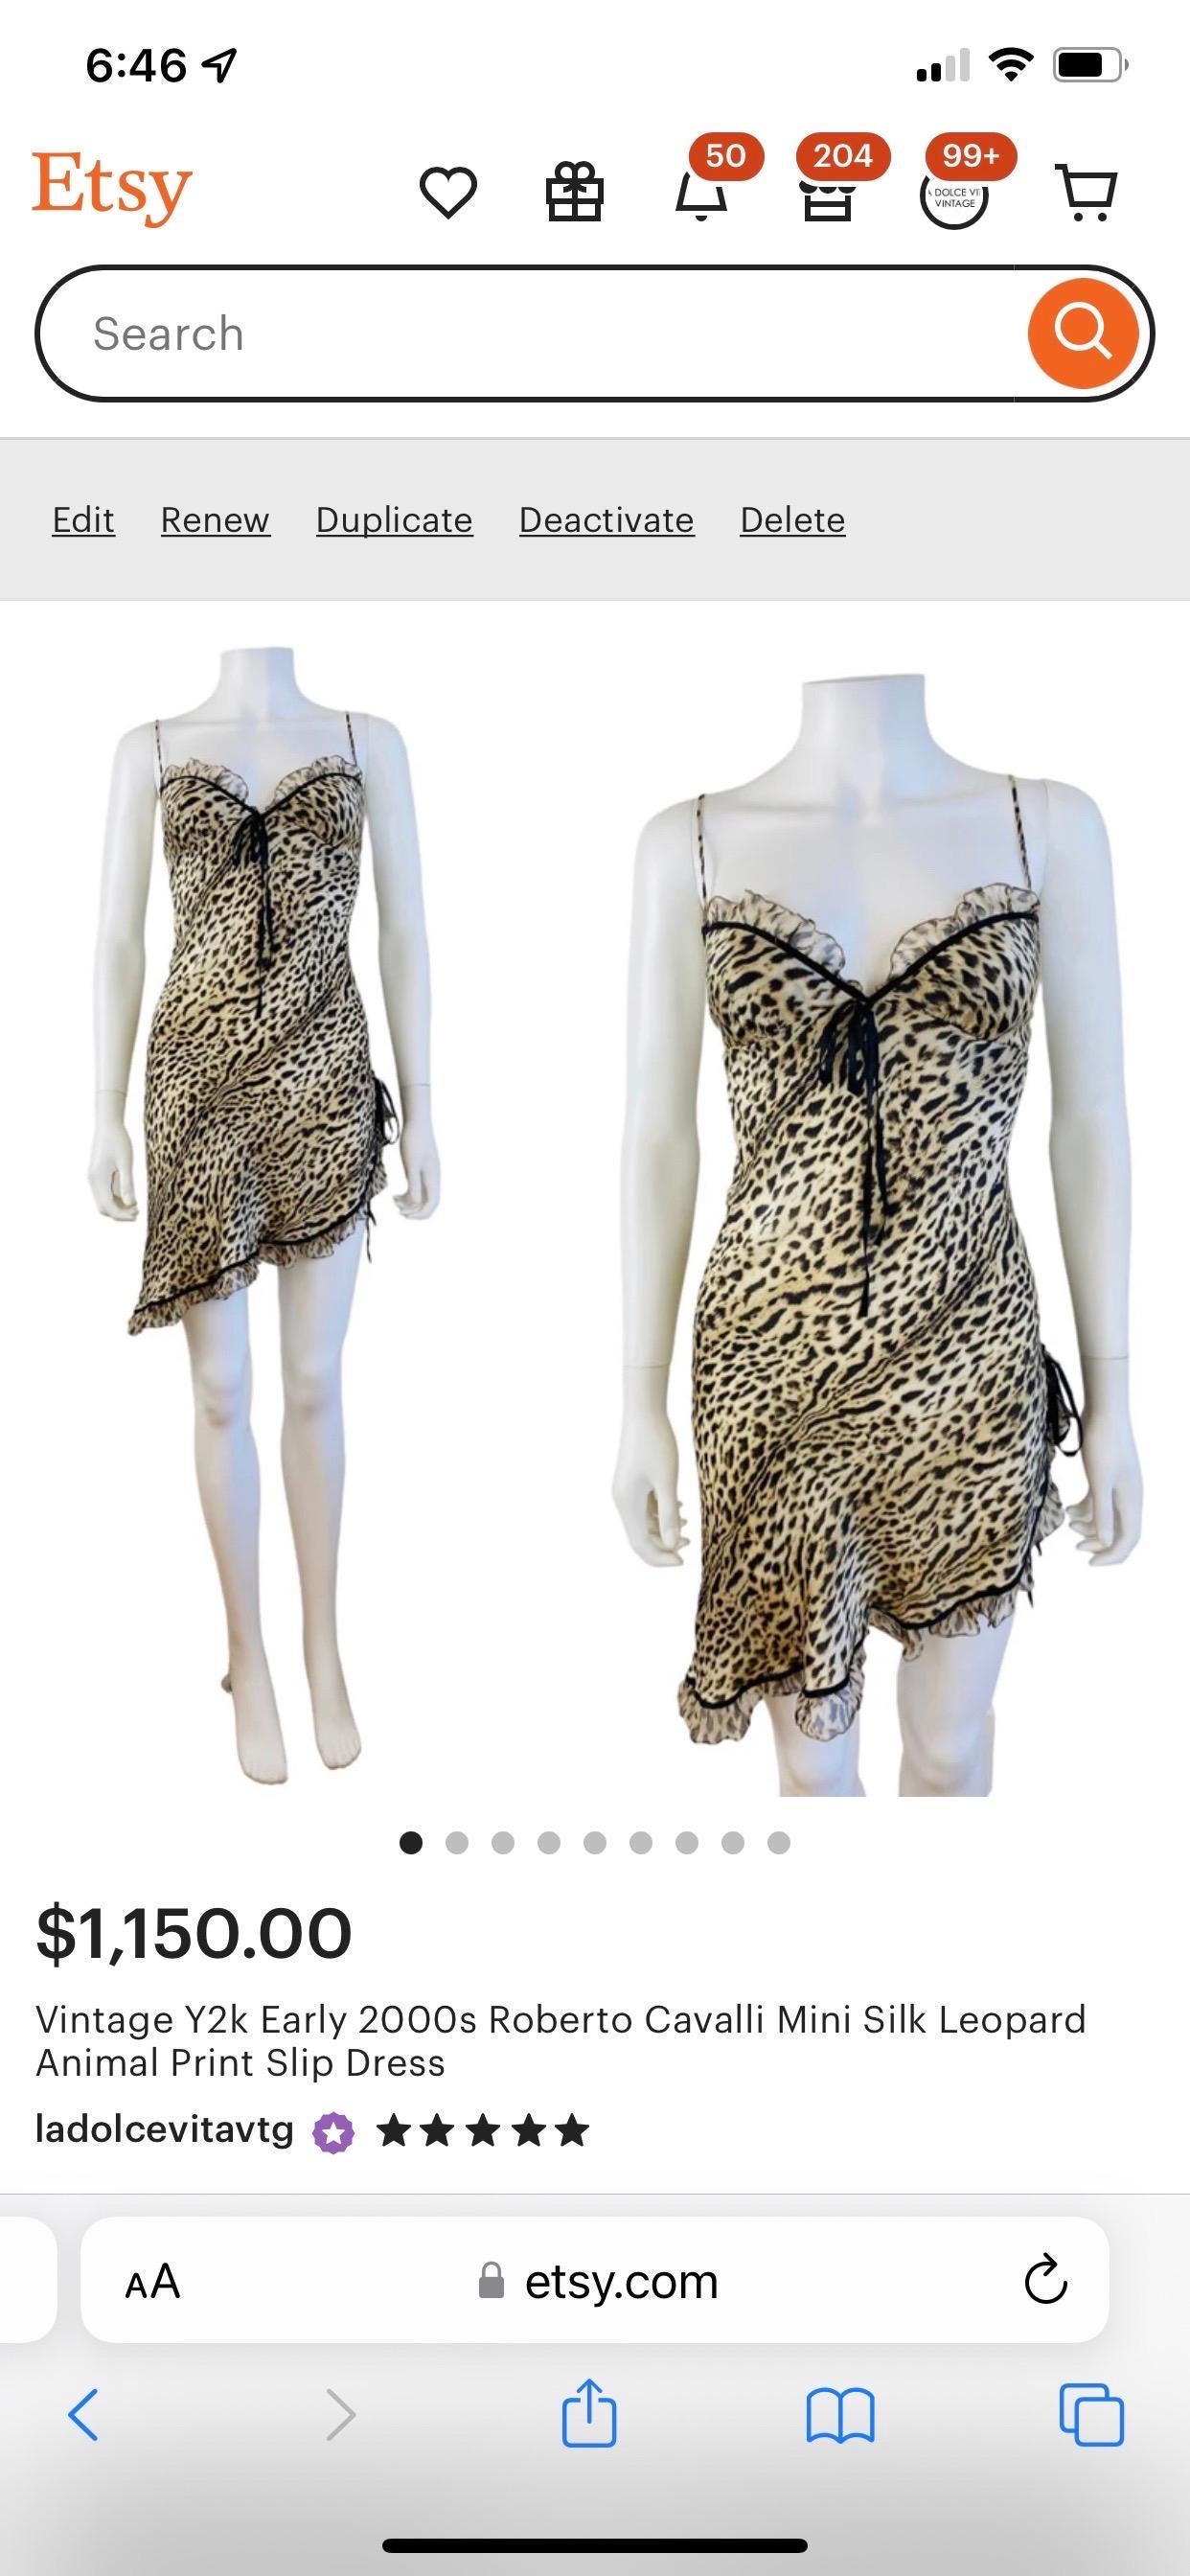 Early 2000s Roberto Cavalli Dress
Semi sheer silk leopard print fabric
Triangle bust details with ruffle trim
Contrasting black trim long ties at bust
Thin shoulder straps
Fitted mini length
High cut detail at the left hip
Unlined
Slips on